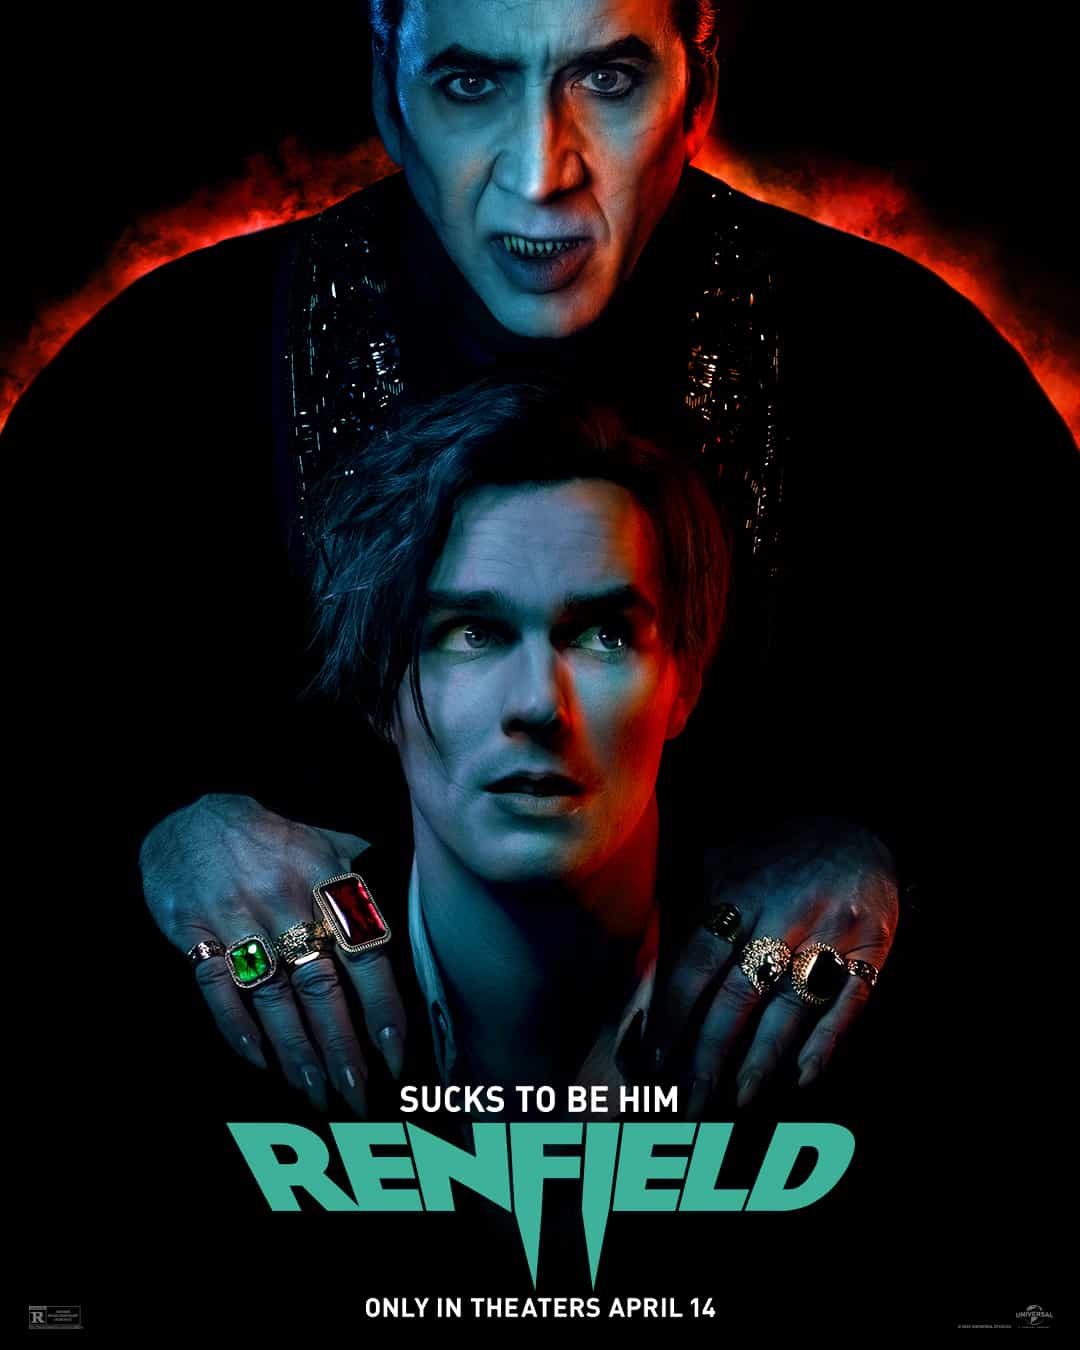 A new trailer and poster released for Renfield starring Nicolas Cage - movie UK release date 14th April 2023 #renfield